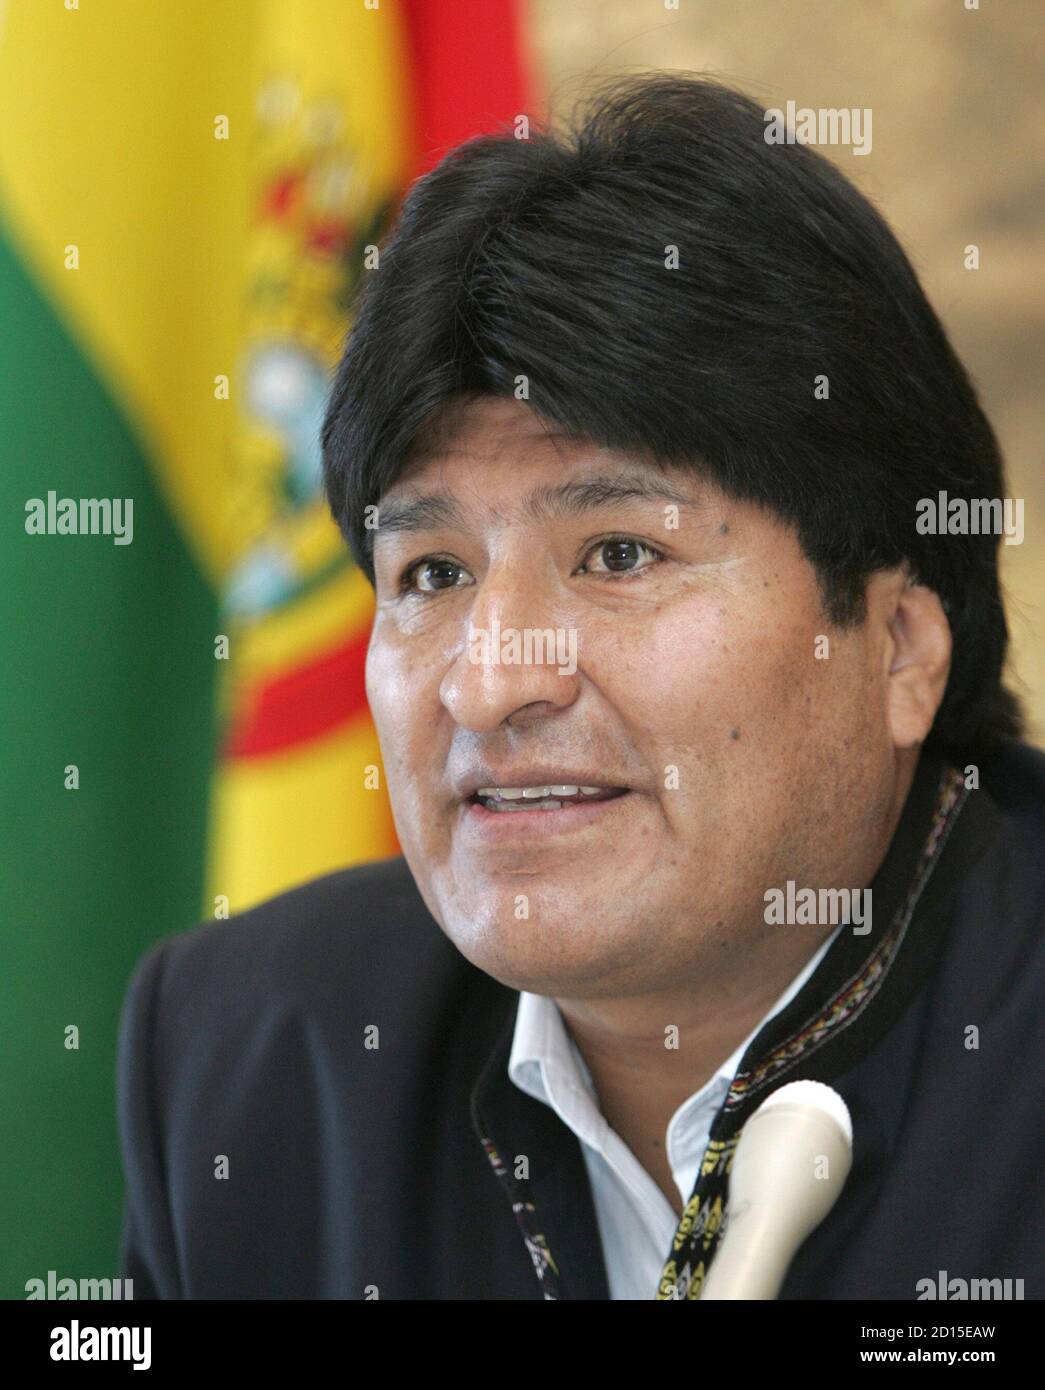 Bolivian President Evo Morales speaks during a news conference in Tokyo  March 8, 2007. REUTERS/Michael Caronna (JAPAN Stock Photo - Alamy